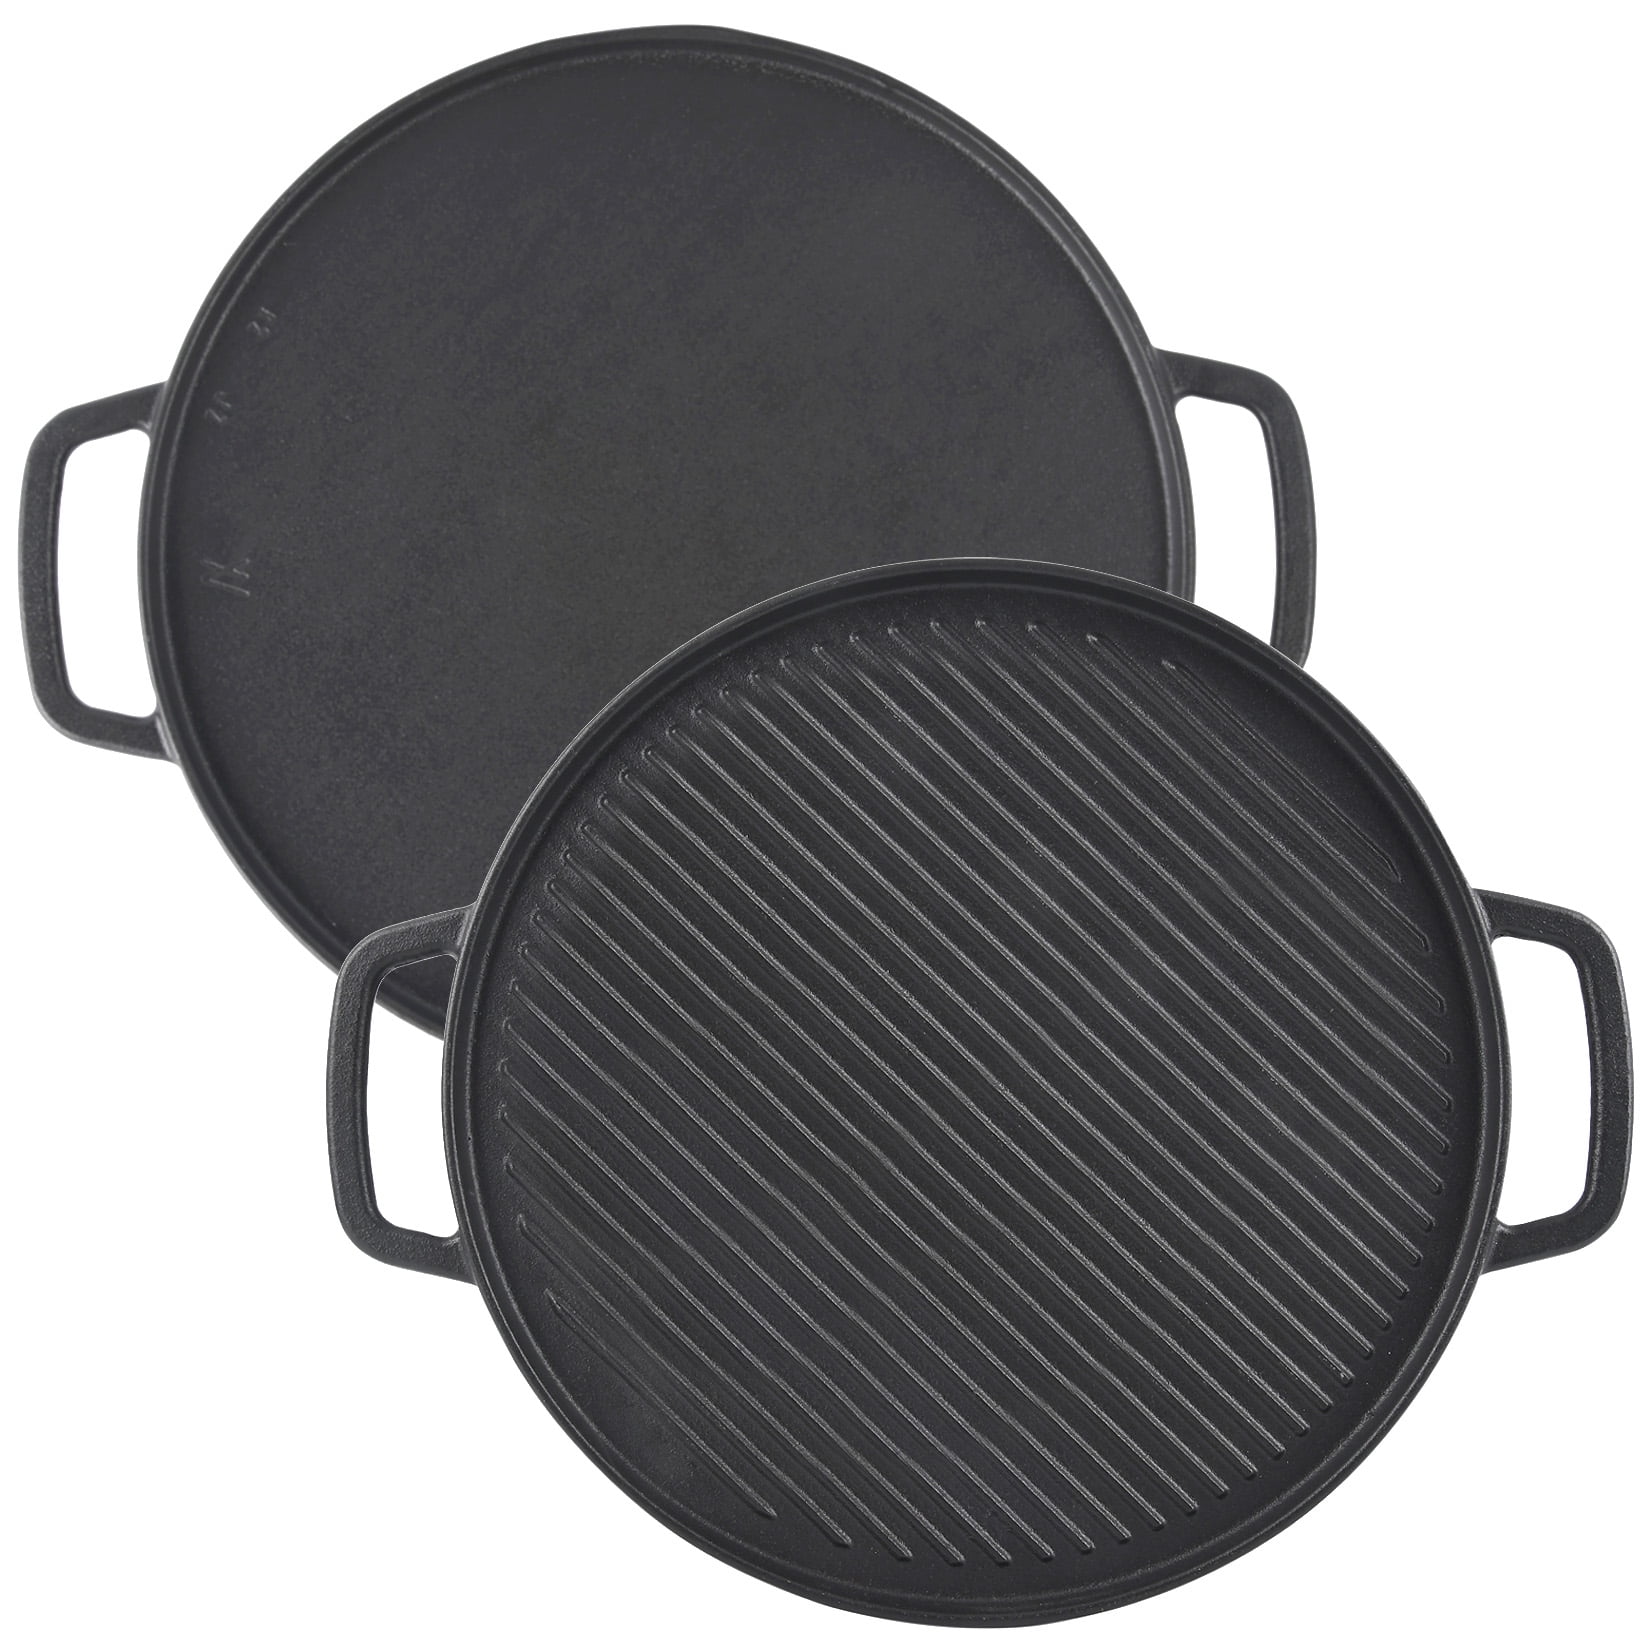 Lodge Pre-Seasoned Cast Iron Reversible Grill/Griddle With Handles, 20 Inch  X 10.5 Inch One Tray price in Egypt,  Egypt